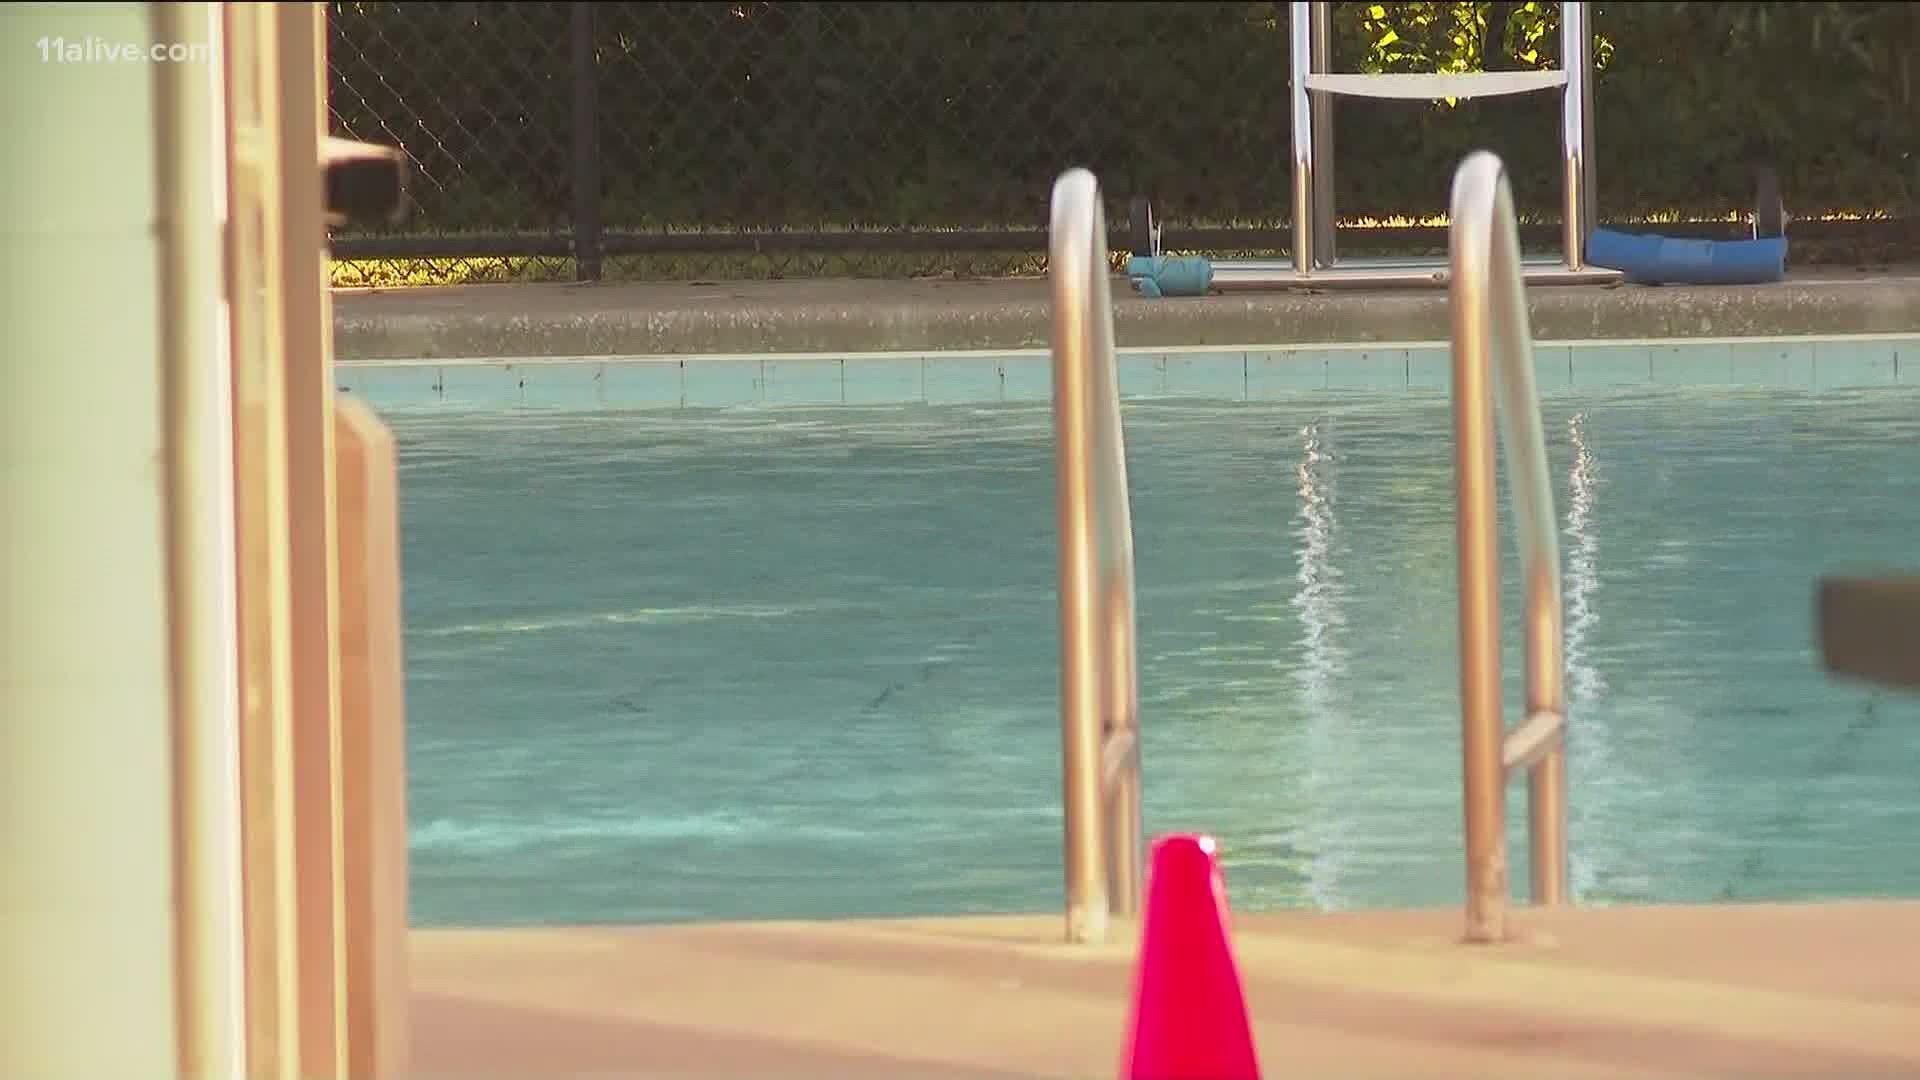 Decatur officials said they are slowly reopening the city's pools for the 2020 summer season.